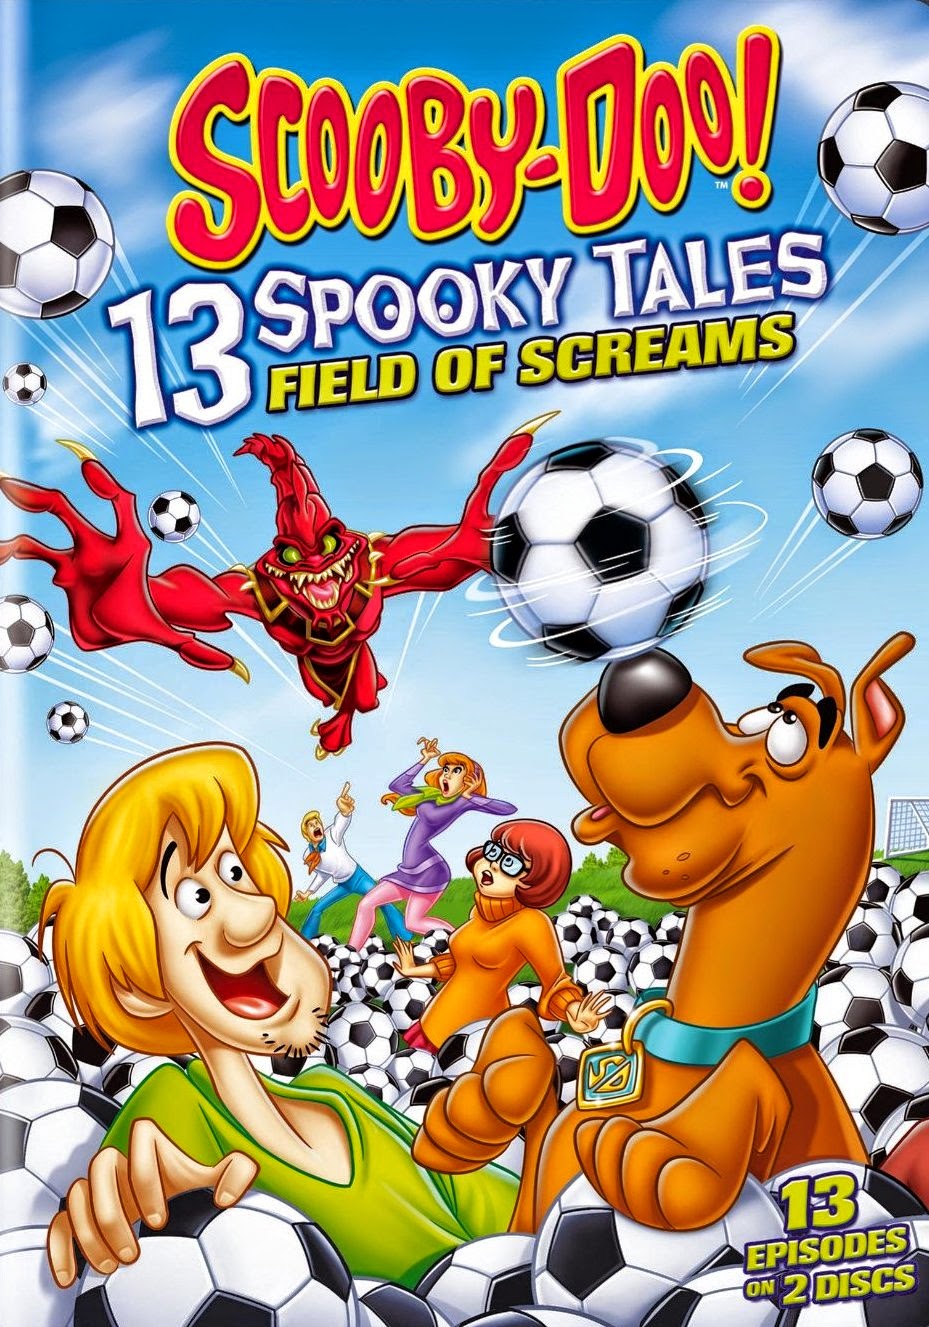  Scooby  Doo  Field of Dreams DVD  Giveaway My Silly Little Gang